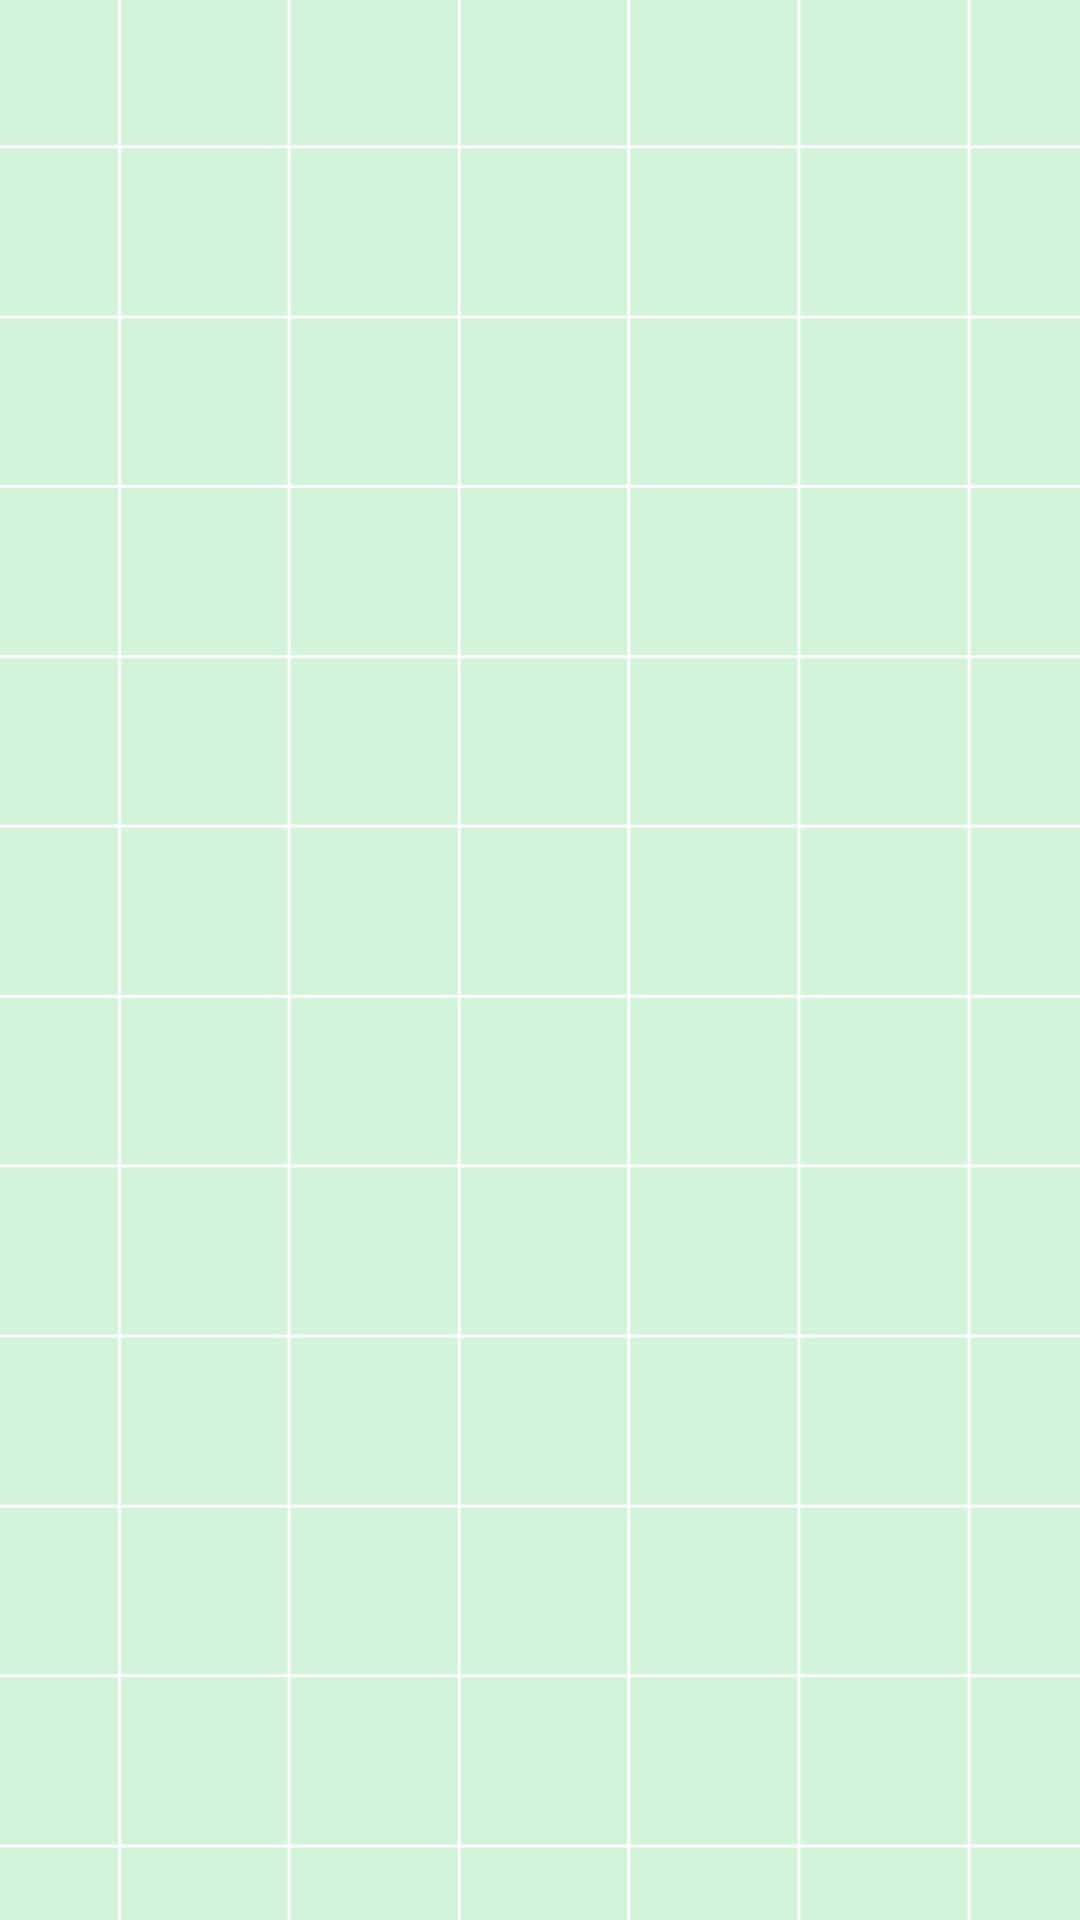 A grid of pastel colors with a dreamy aesthetic